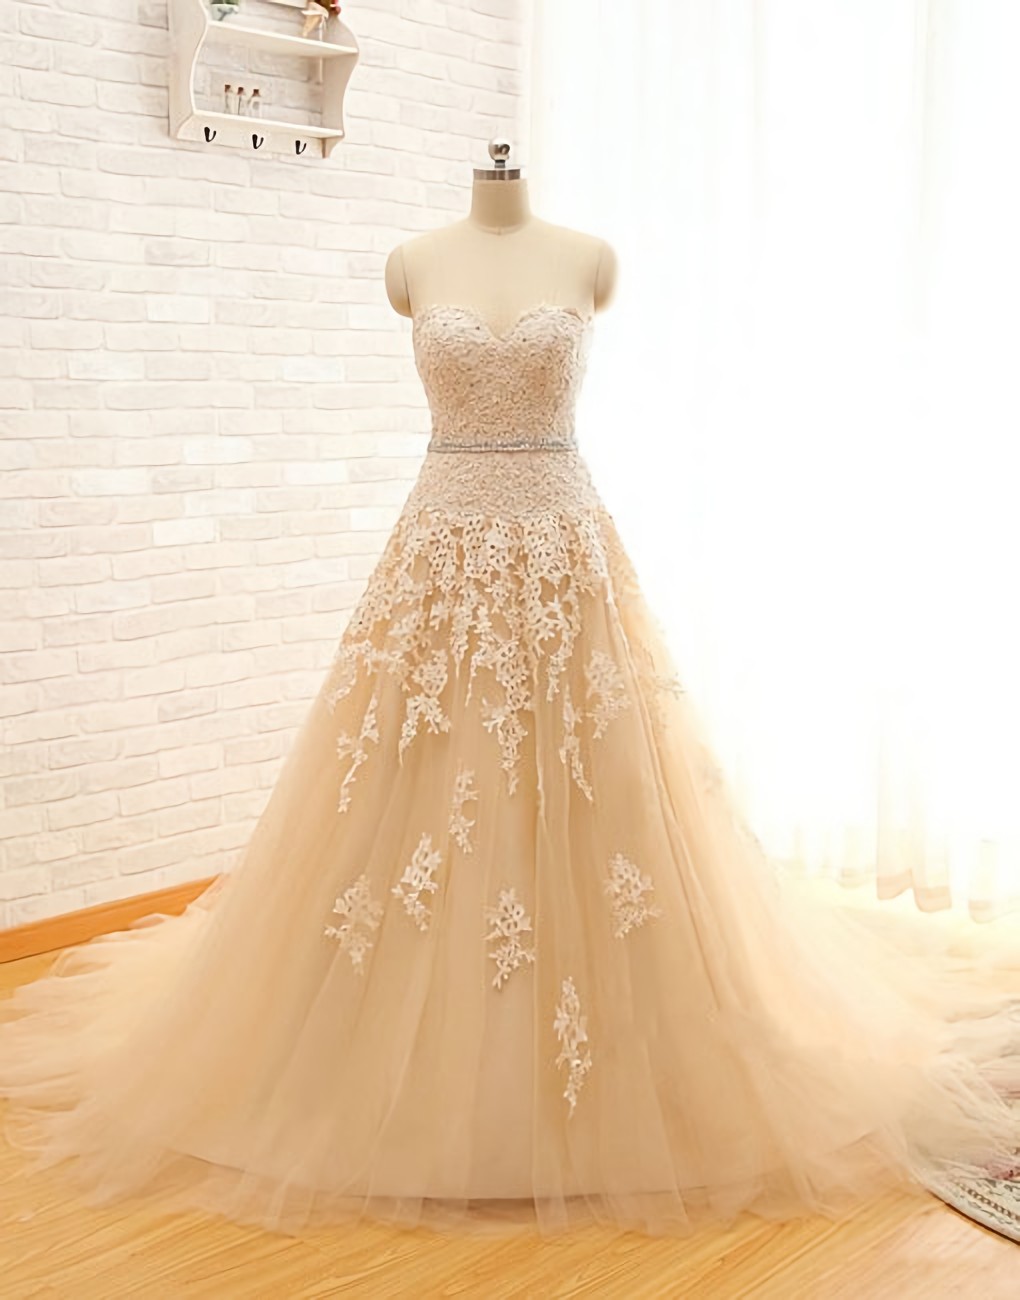 Elegant A-line Sweetheart Lace Tulle Formal Prom Dress, Beautiful Long Prom Dress, Banquet Party Dress